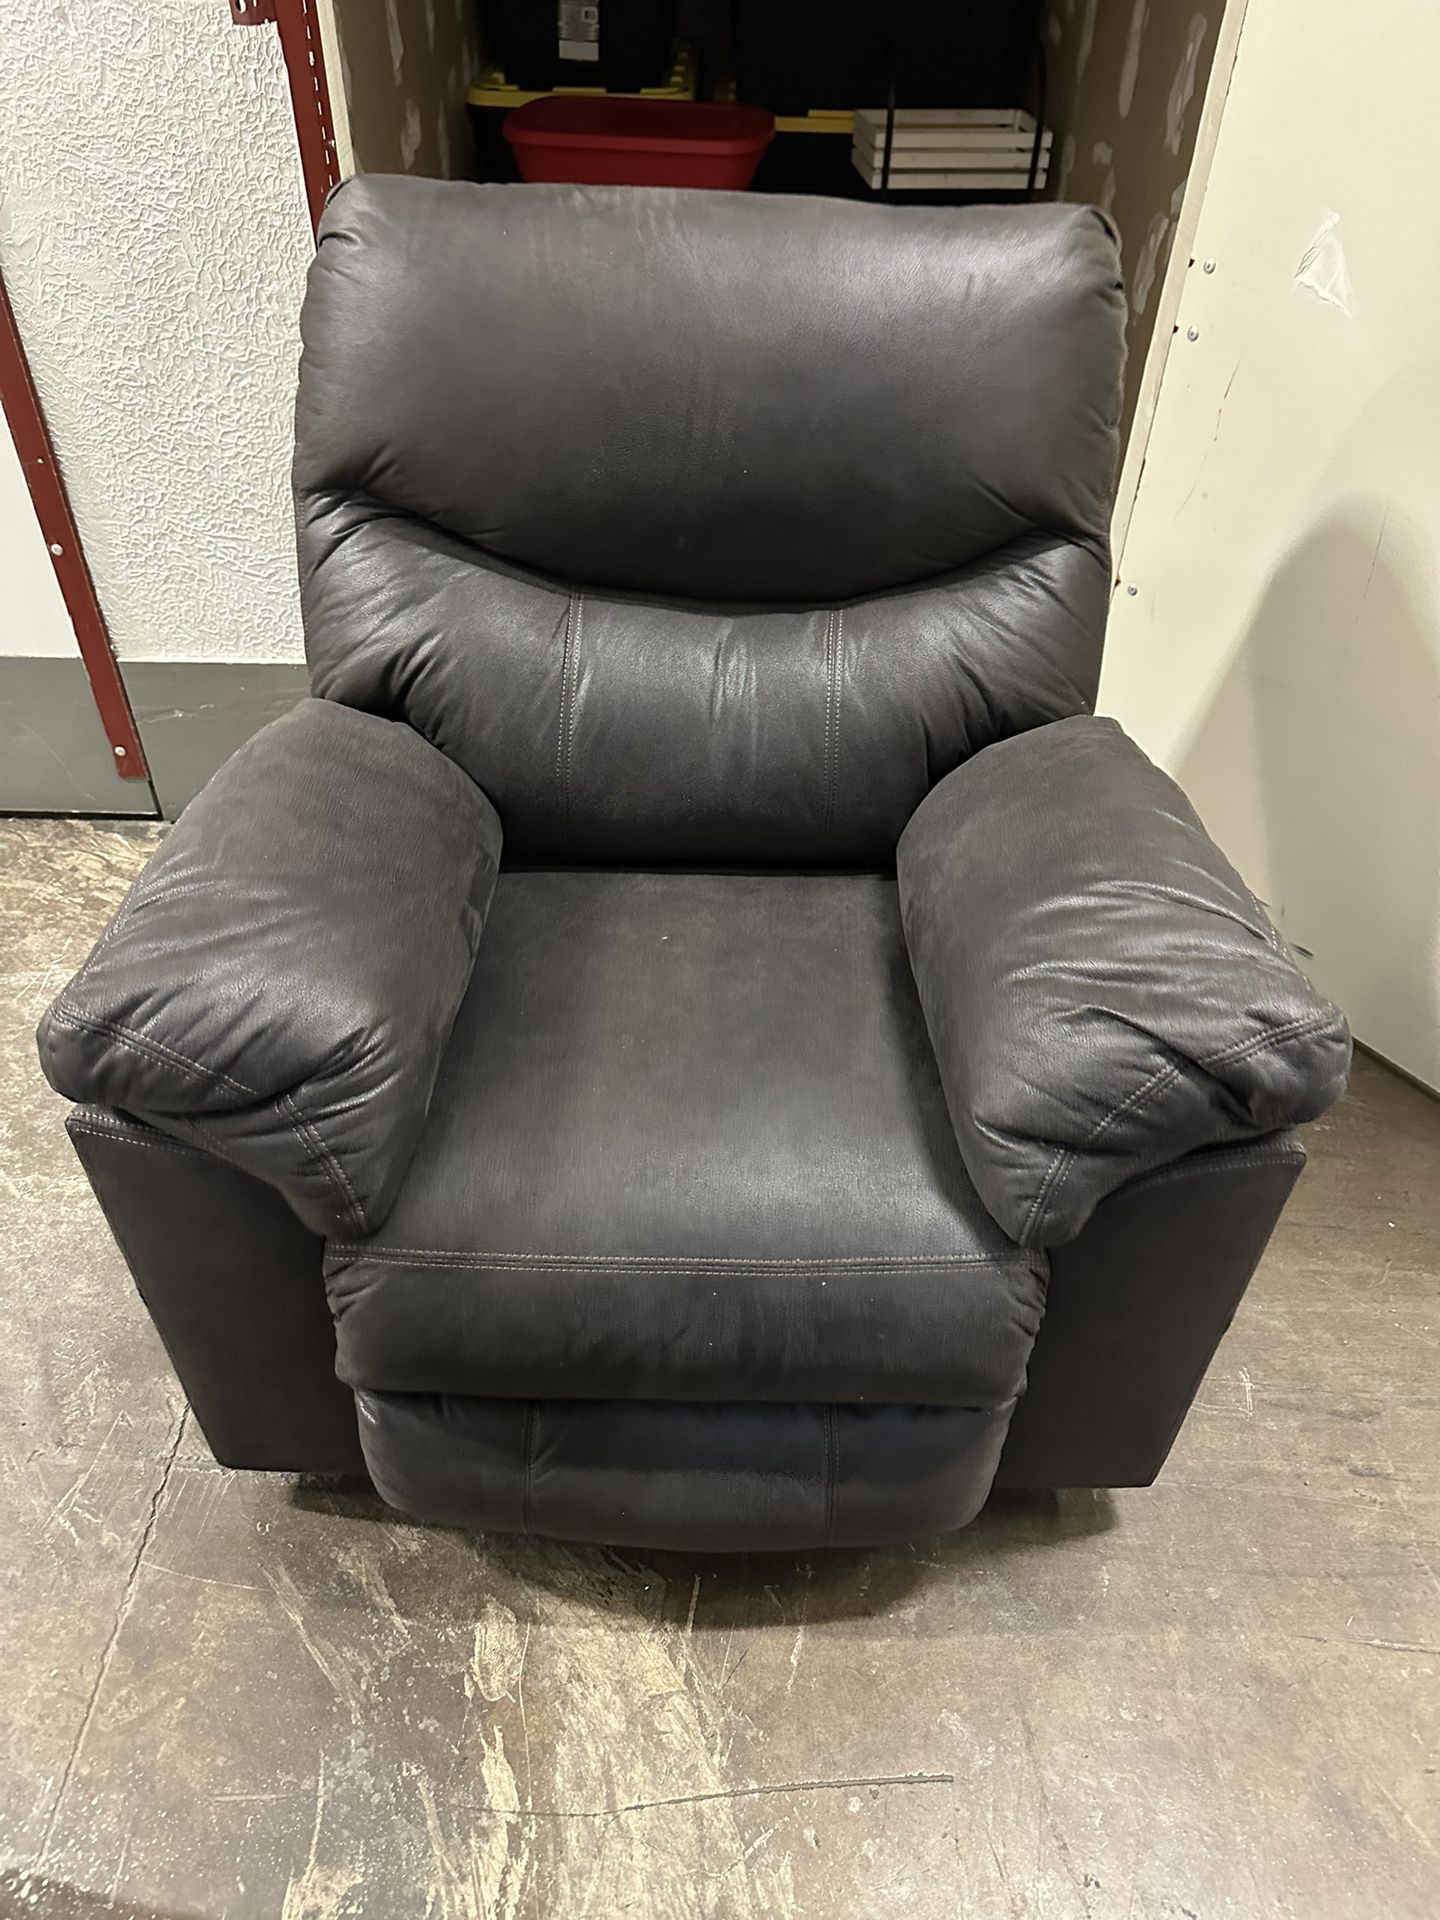 Chocolate Brown Recliner